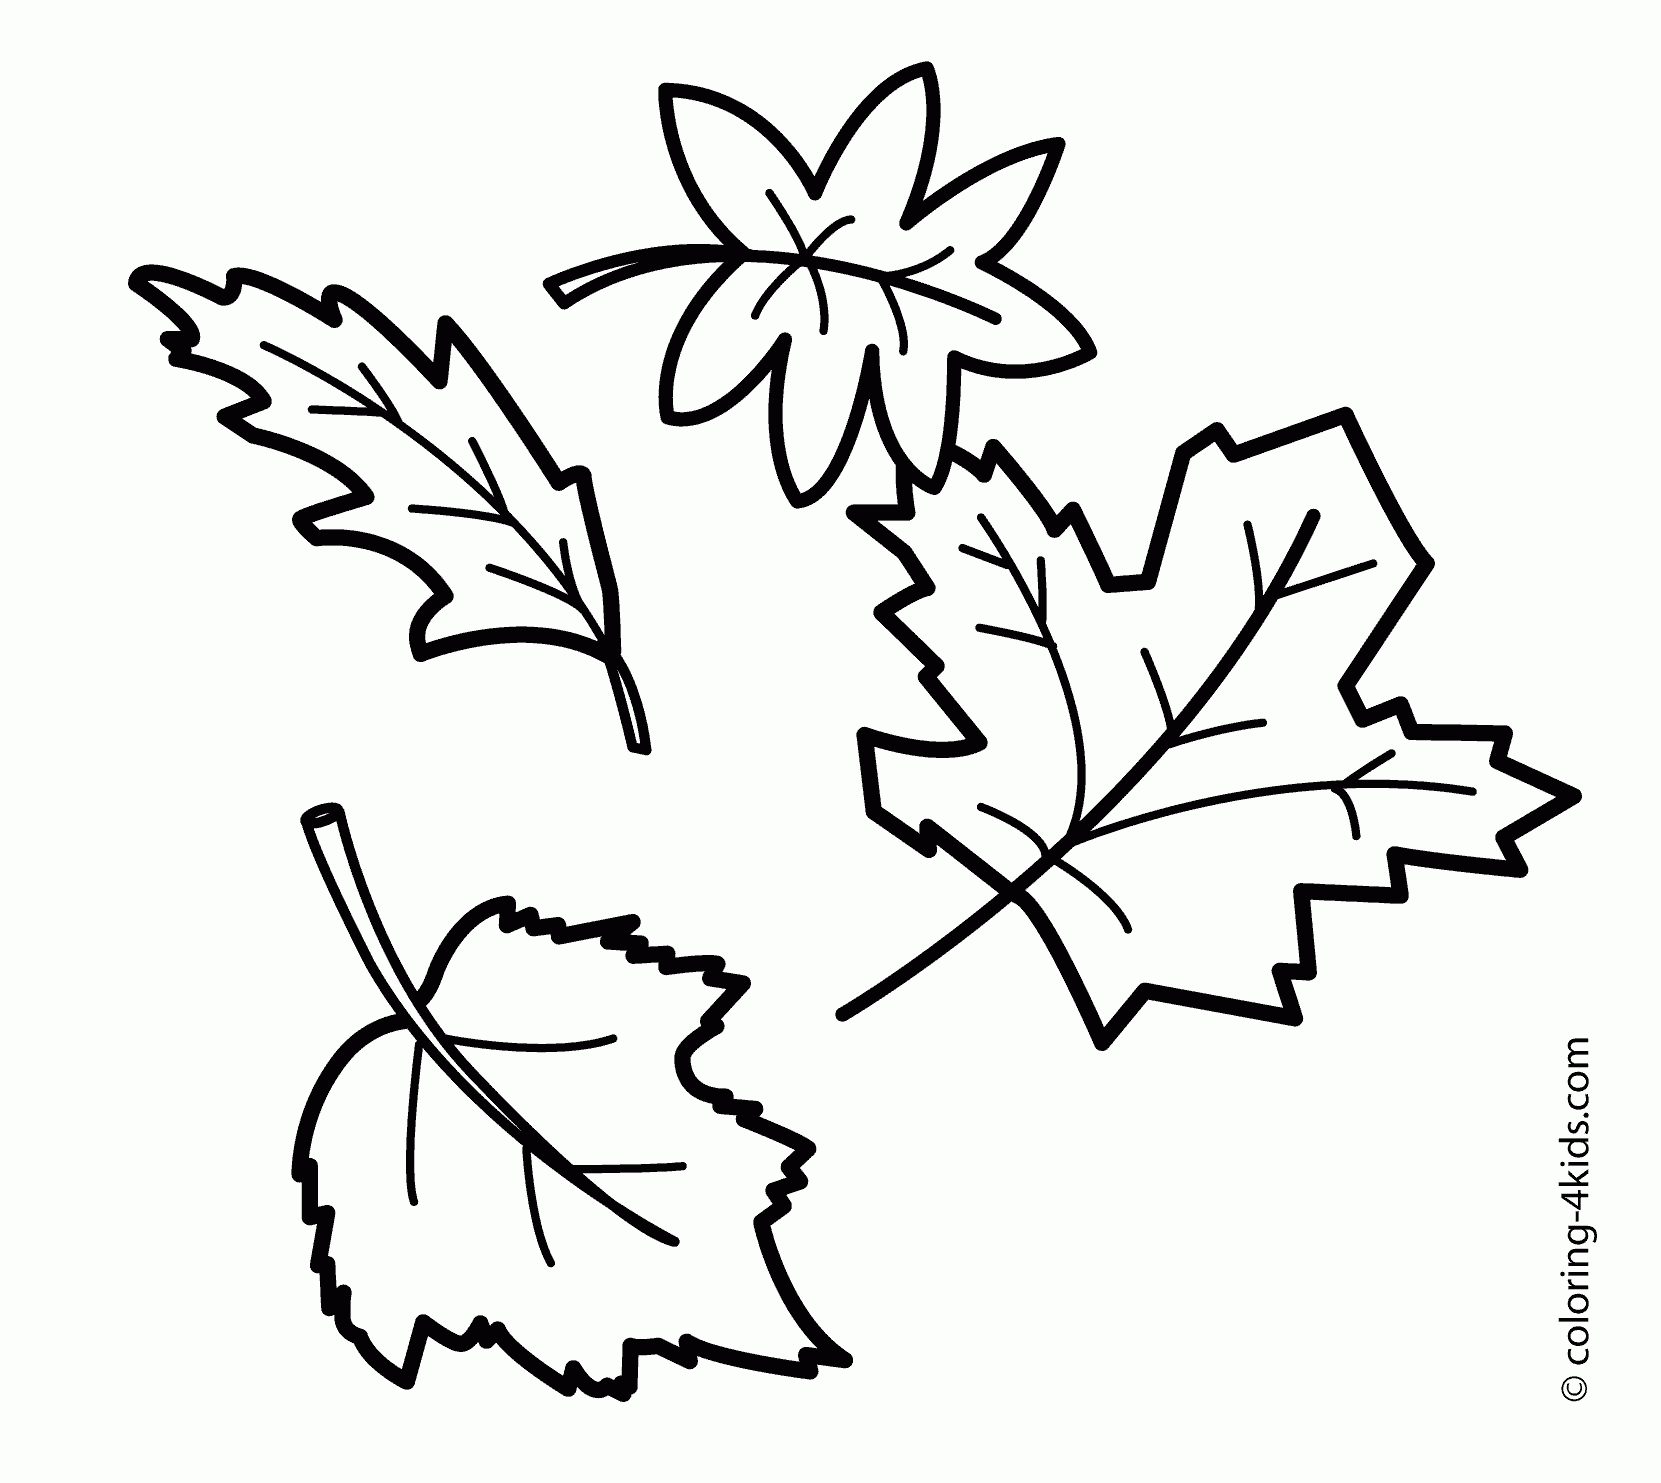 Coloring Pages: Awesome Autumn Leaves Coloring Pages Photo - Free Printable Pictures Of Autumn Leaves